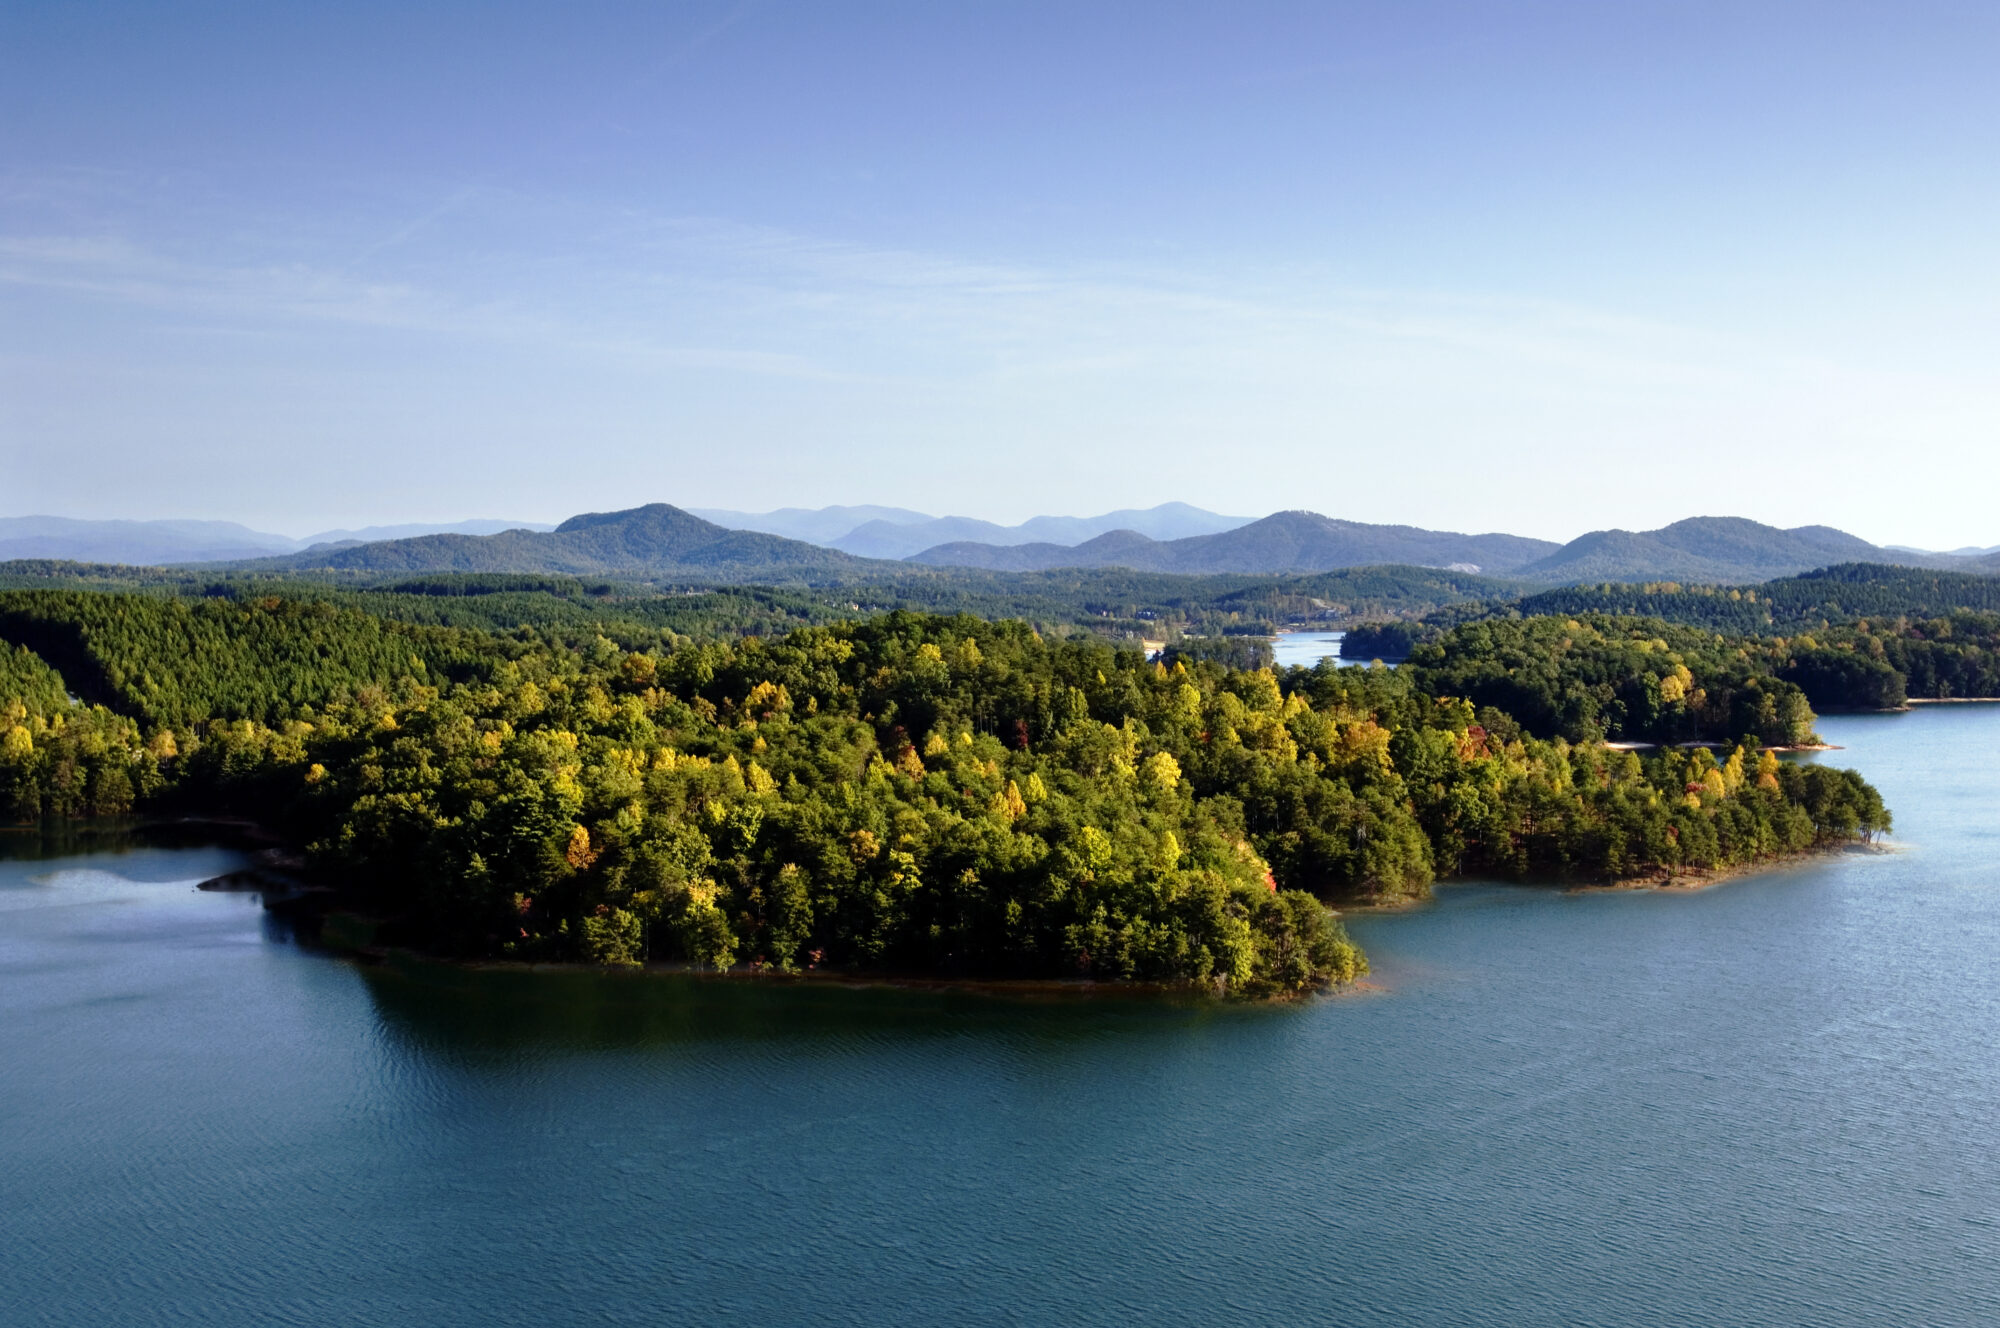 The Reserve at Lake Keowee: Home to a Record Setting 2020